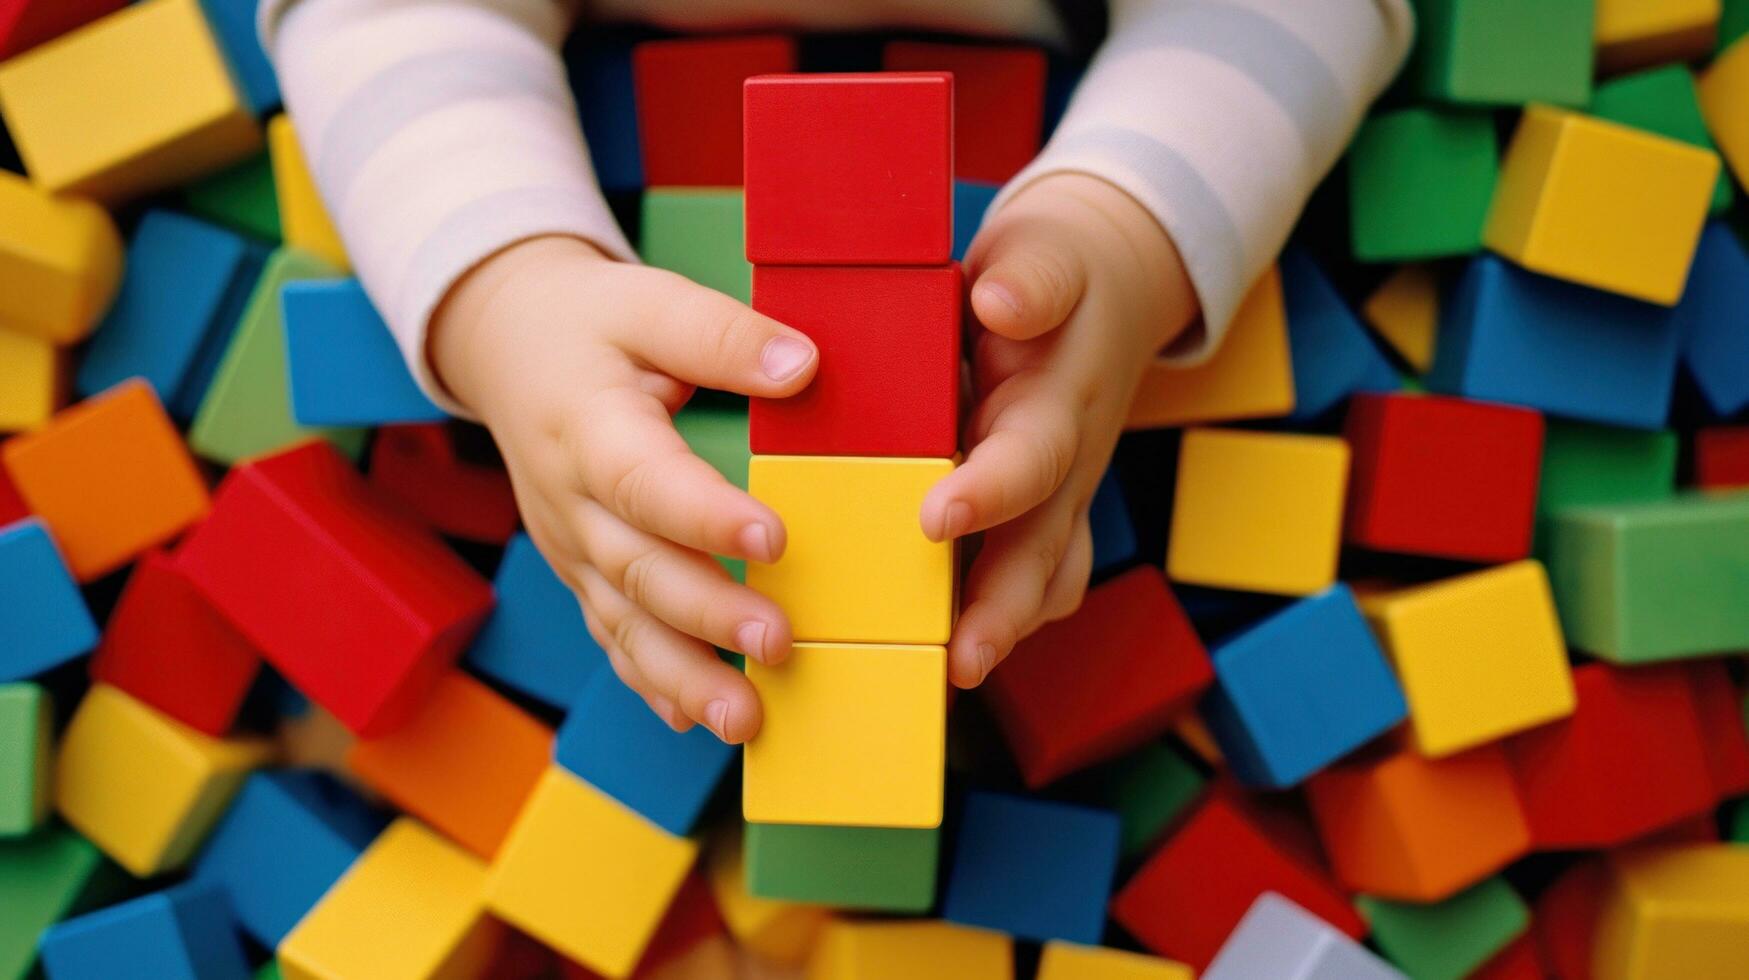 a young child's hands playing with of colorful building blocks photo